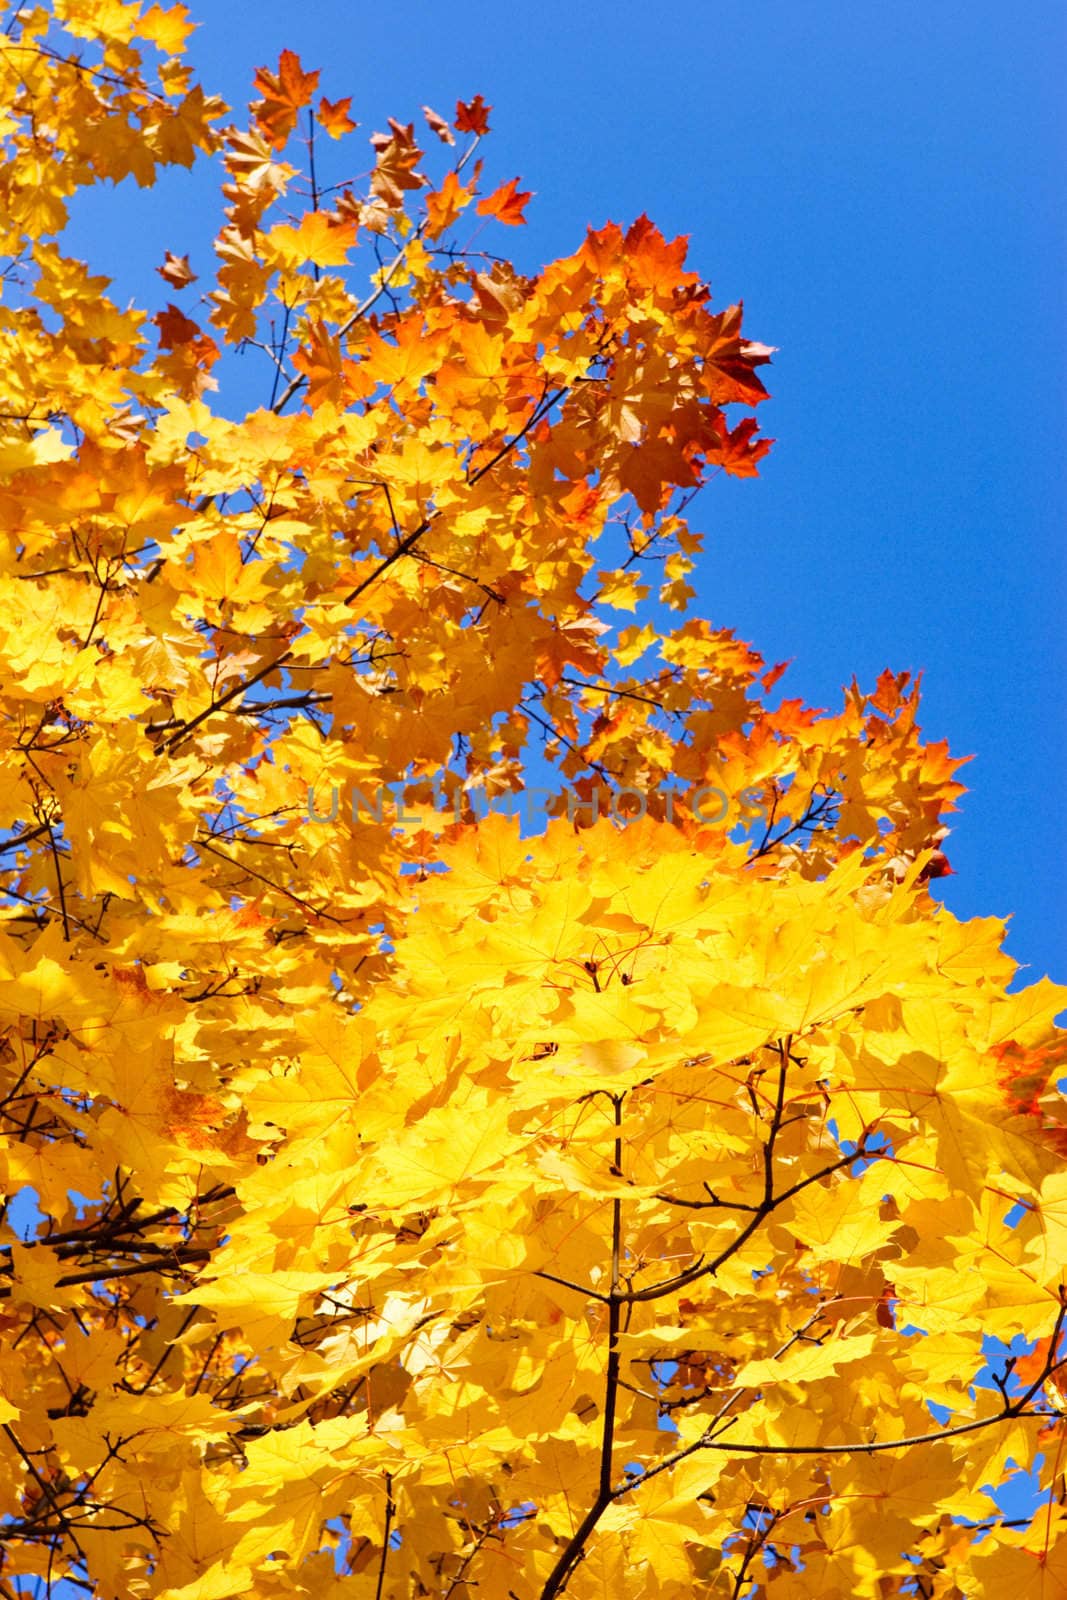 Yellow and red leaves on maple tree against clear blue sky at Autumn